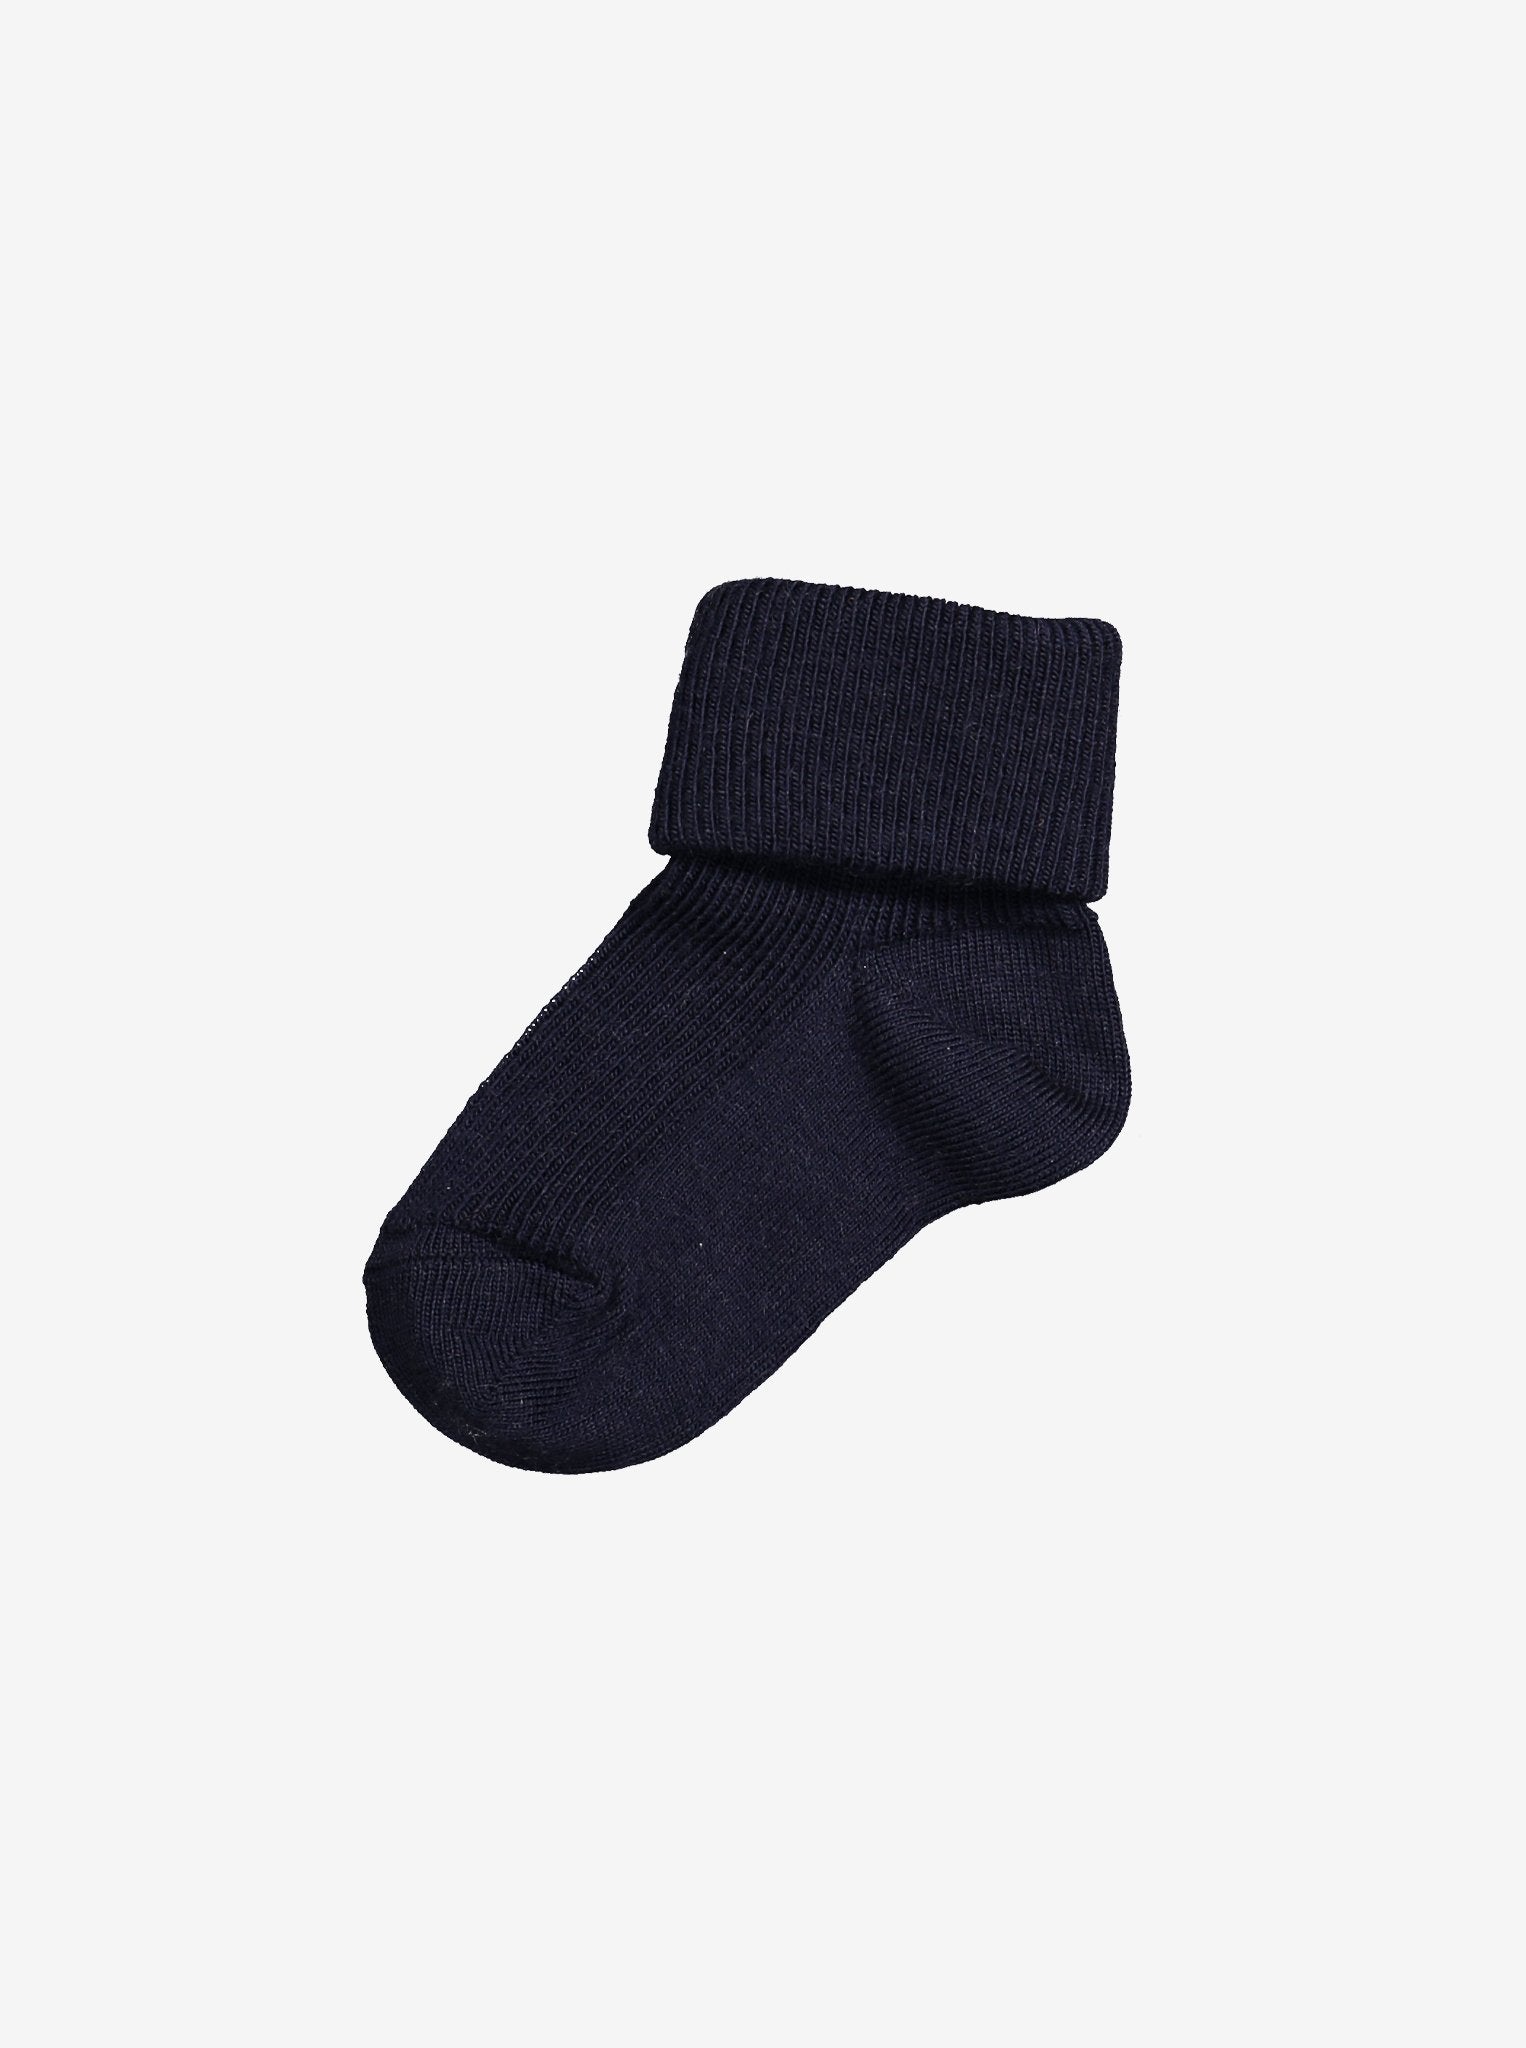 baby navy merino antislip kids socks unisex, warm comfortable and none itchy, ethical and long lasting 